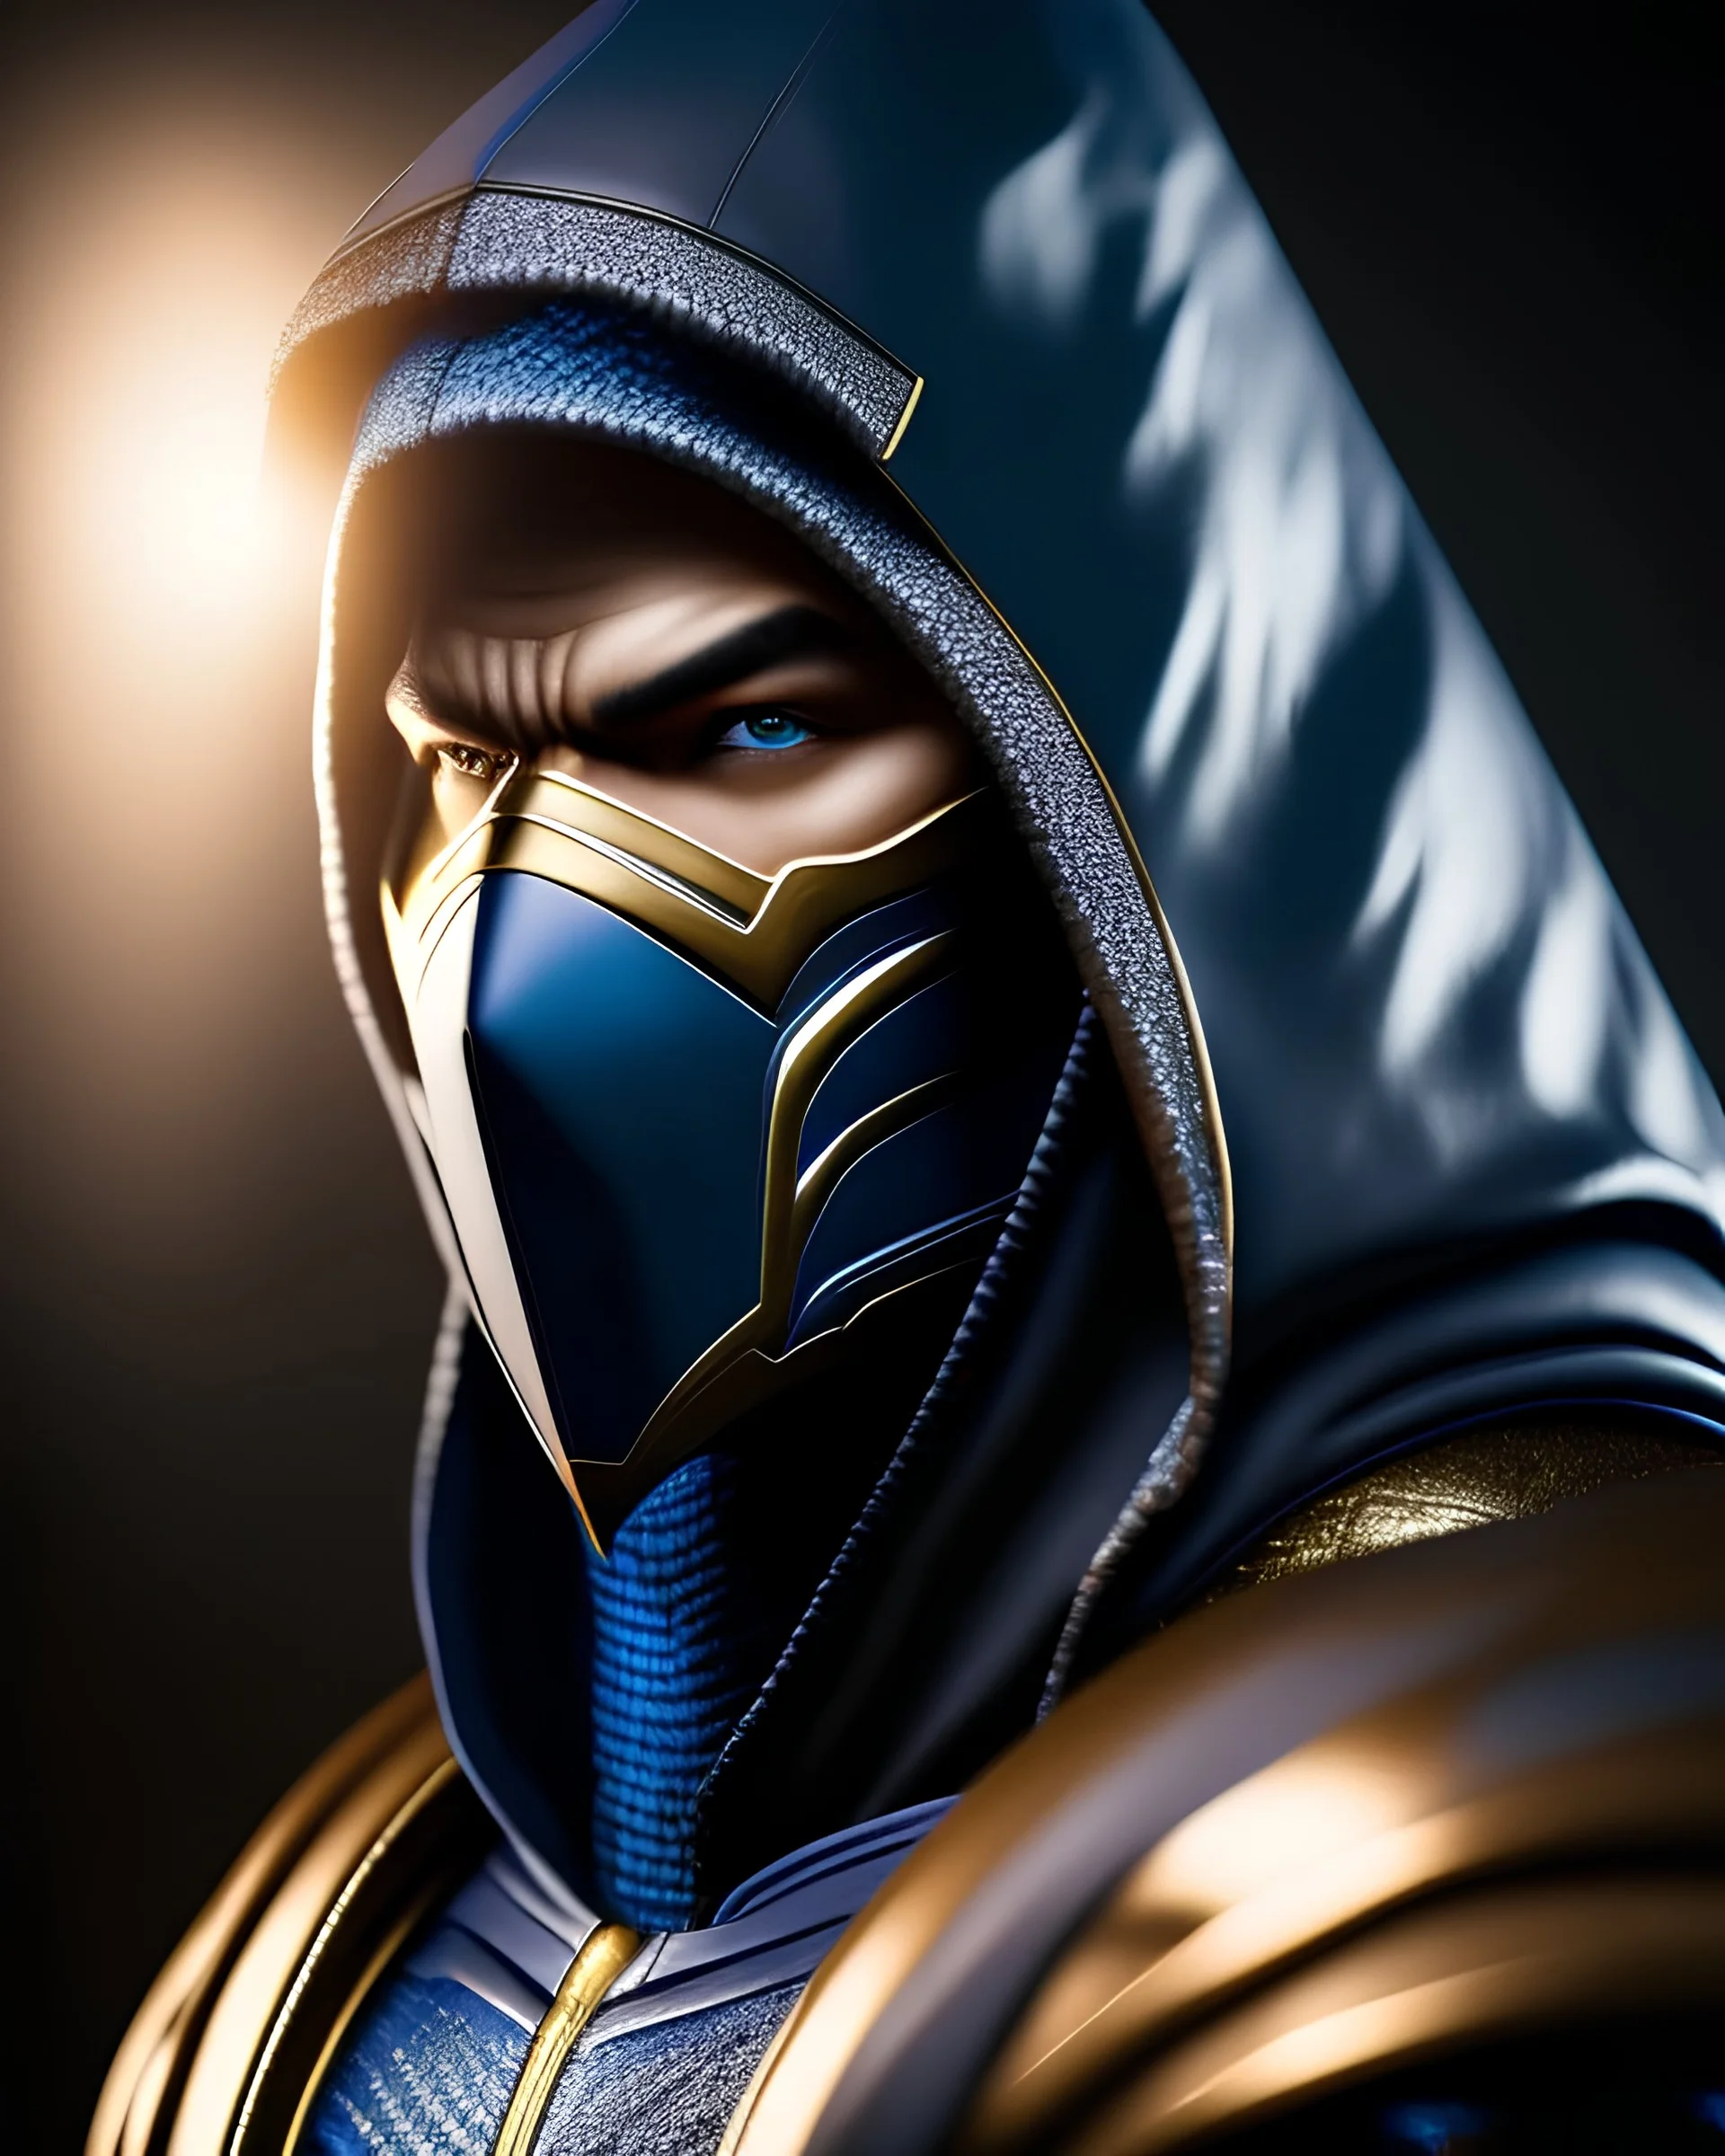 SUBZERO, mask cover whole face and hood , mortal kombat 11, highly detailed, hyper-detailed, beautifully color-coded, insane details, intricate details, beautifully color graded, Cinematic, Color Grading, Editorial Photography, Depth of Field, DOF, Tilt Blur, White Balance, 32k, Super-Resolution, Megapixel, ProPhoto RGB, VR, Half rear Lighting, Backlight, non photorealistic rendering